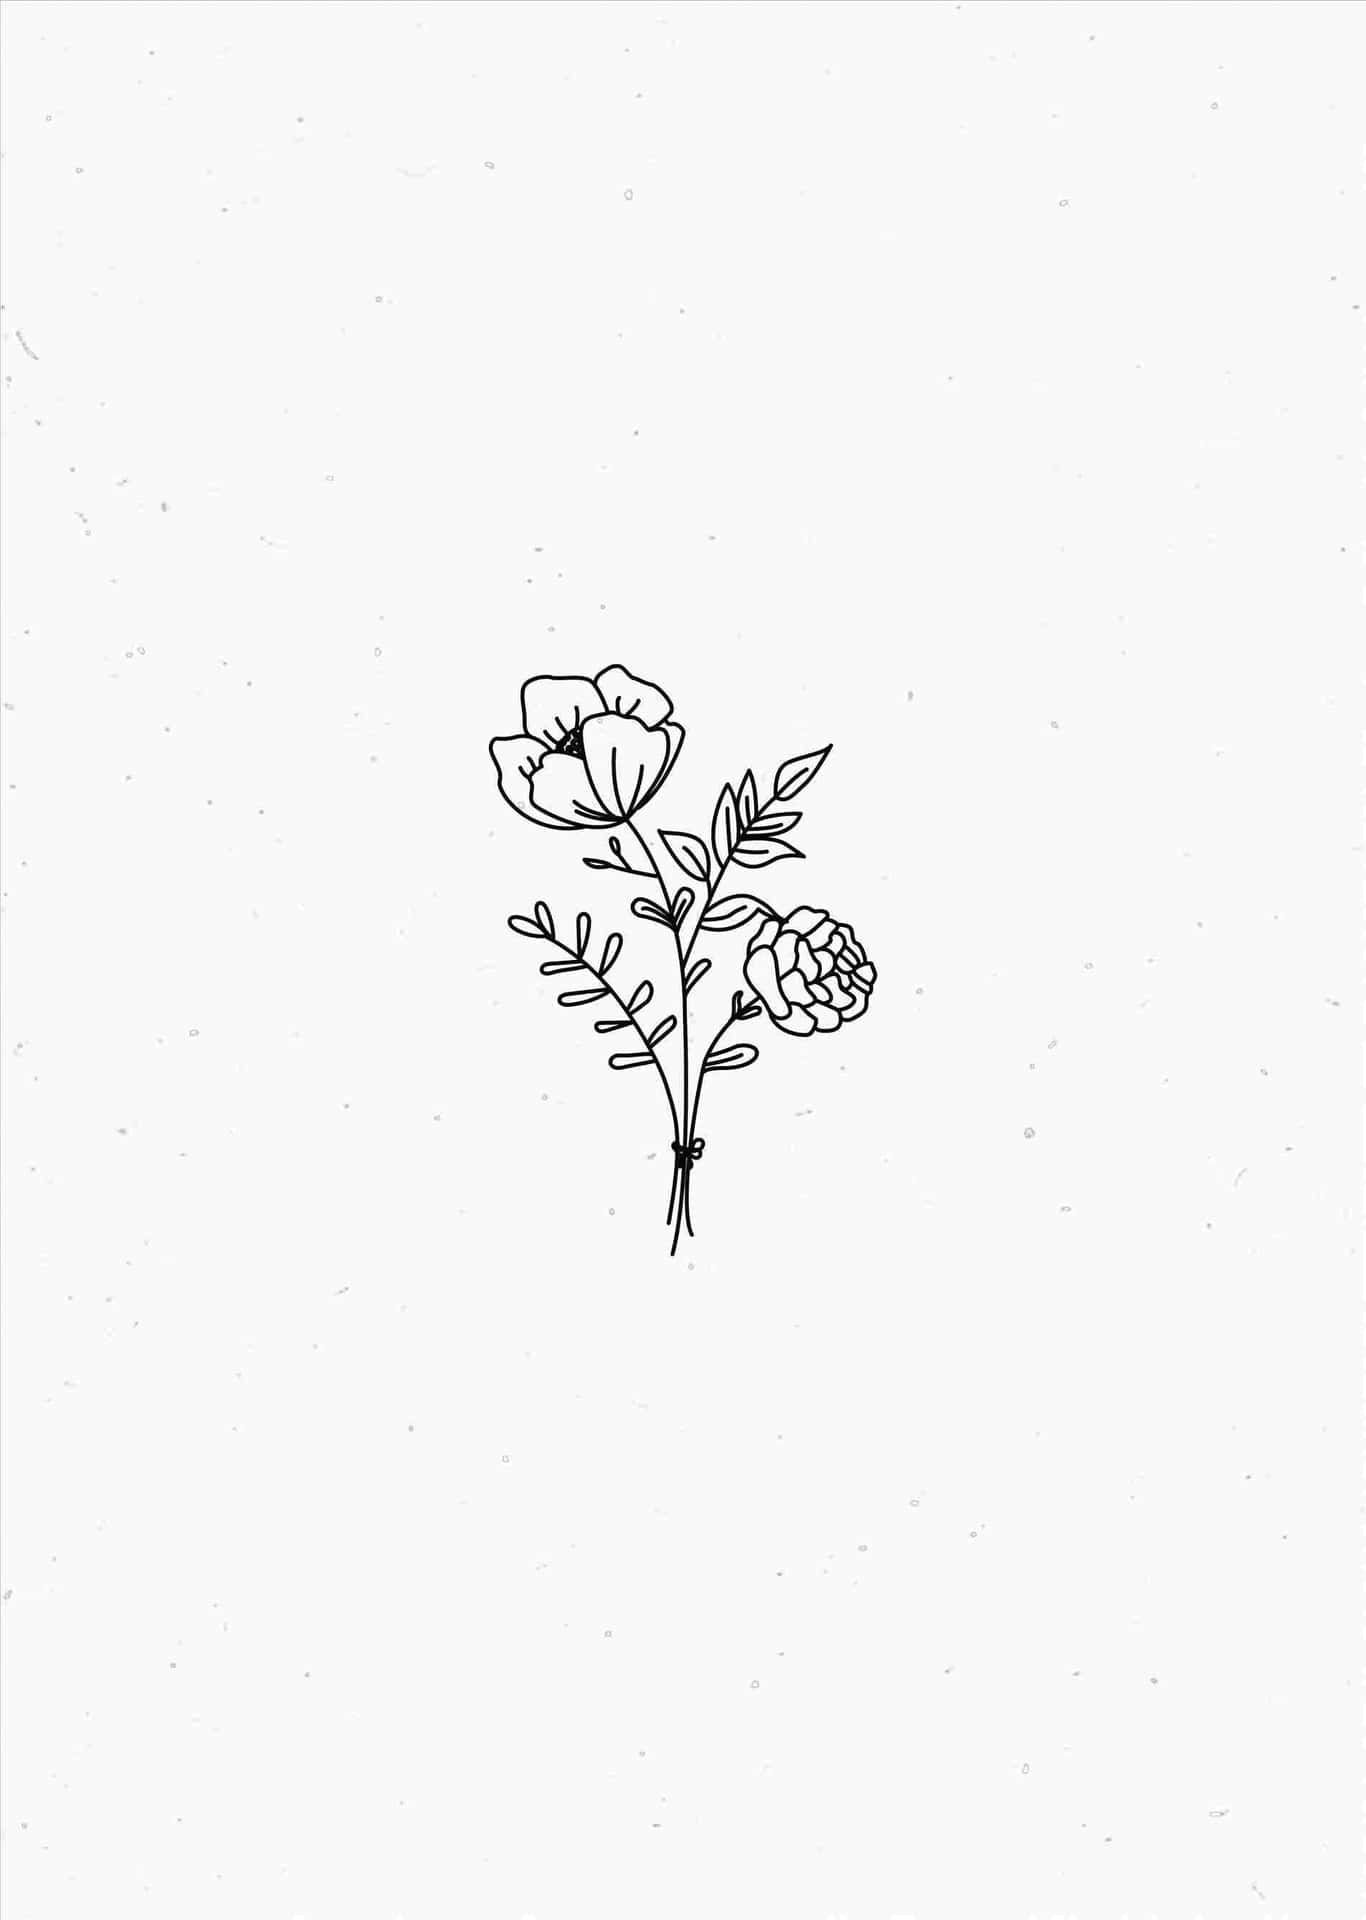 Stimulate Your Imagination with Minimalist Drawing Wallpaper